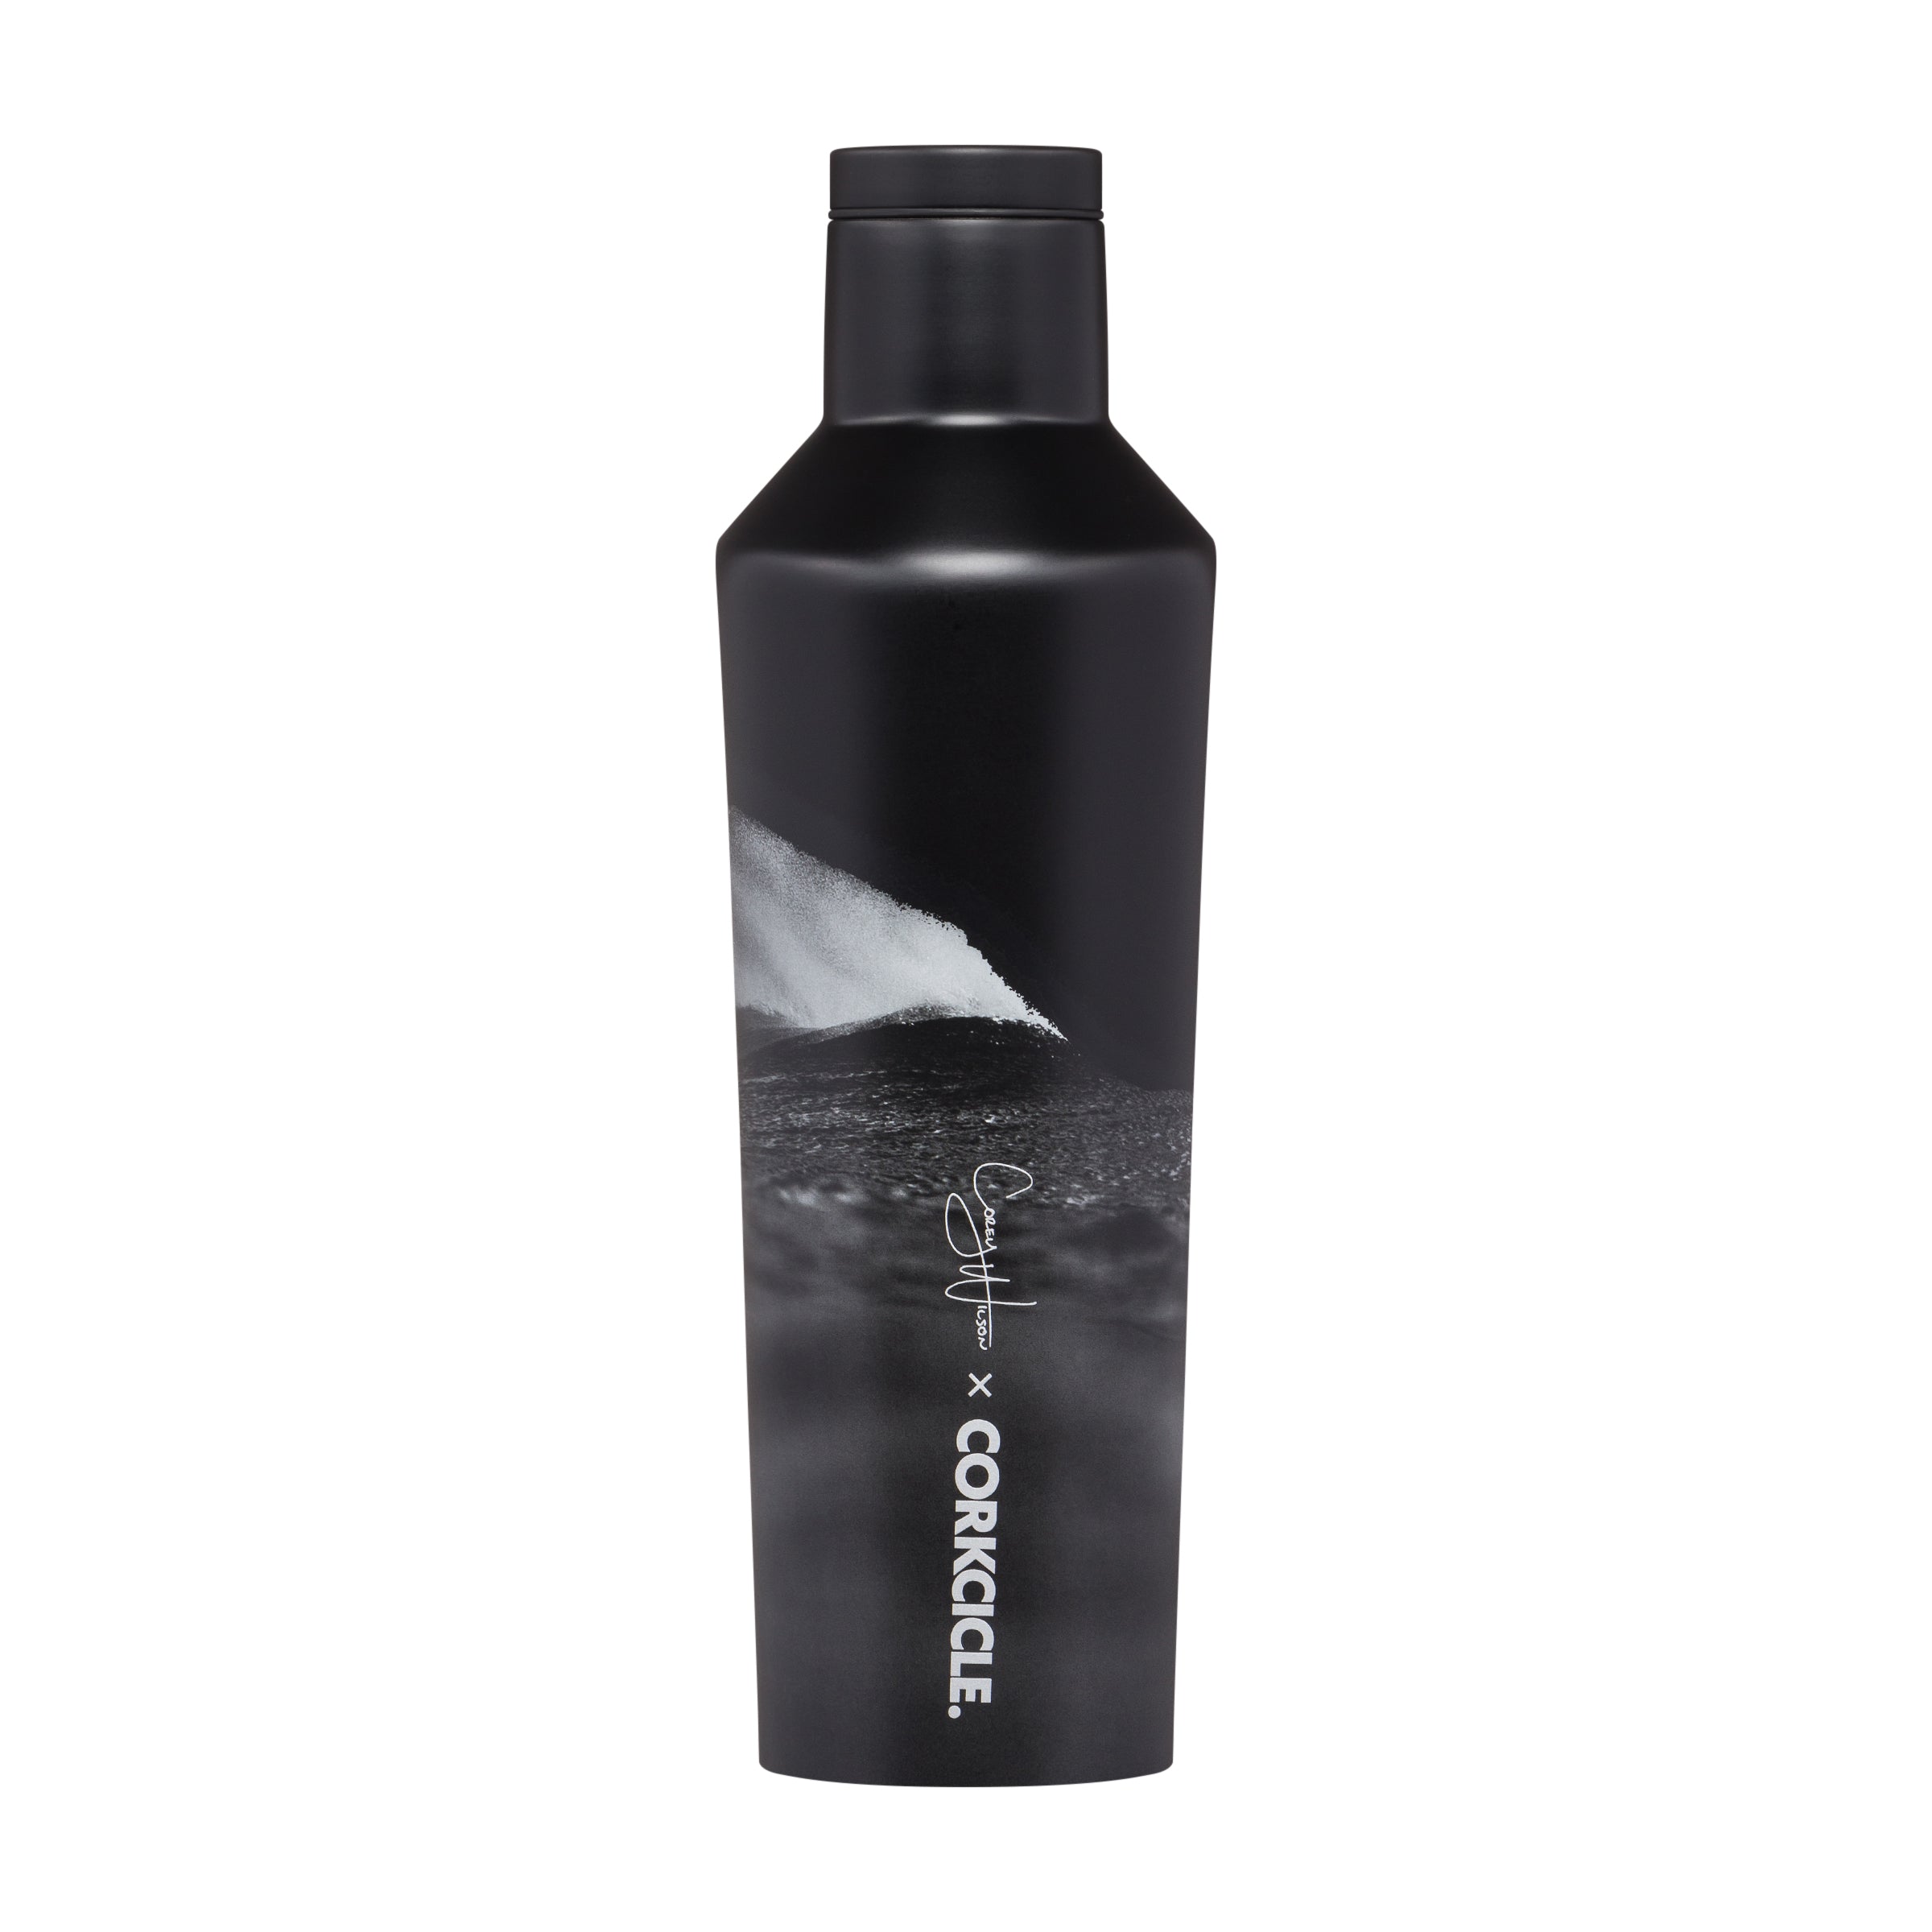 CORKCICLE x COREY WILSON *Exclusive*   Stainless Steel Insulated Canteen 16oz (475ml) - Night Swim